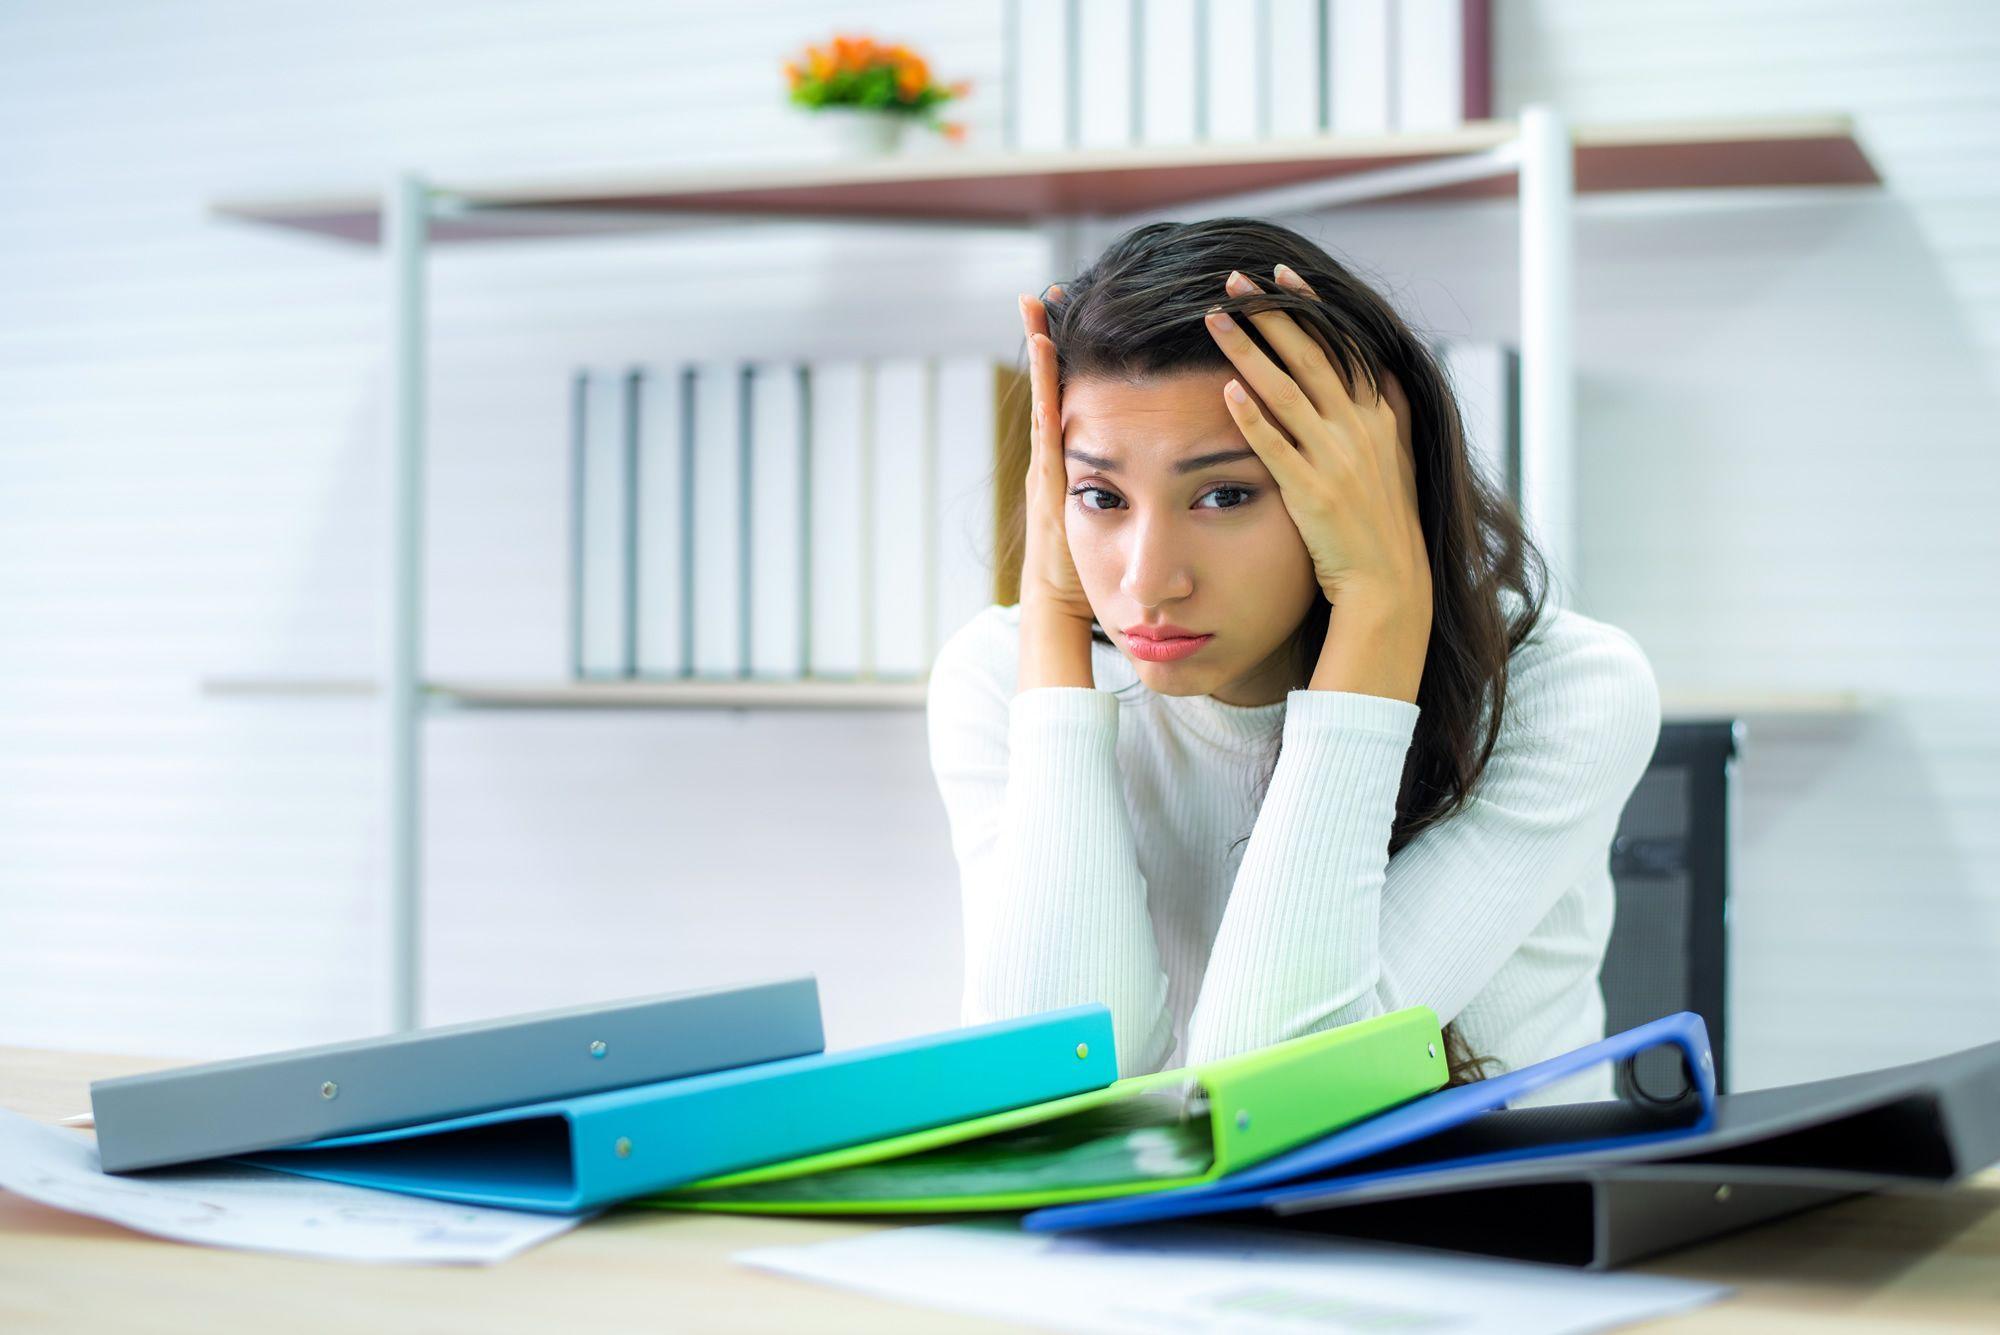 Pleasanteeism – the workplace issue you should be worried about